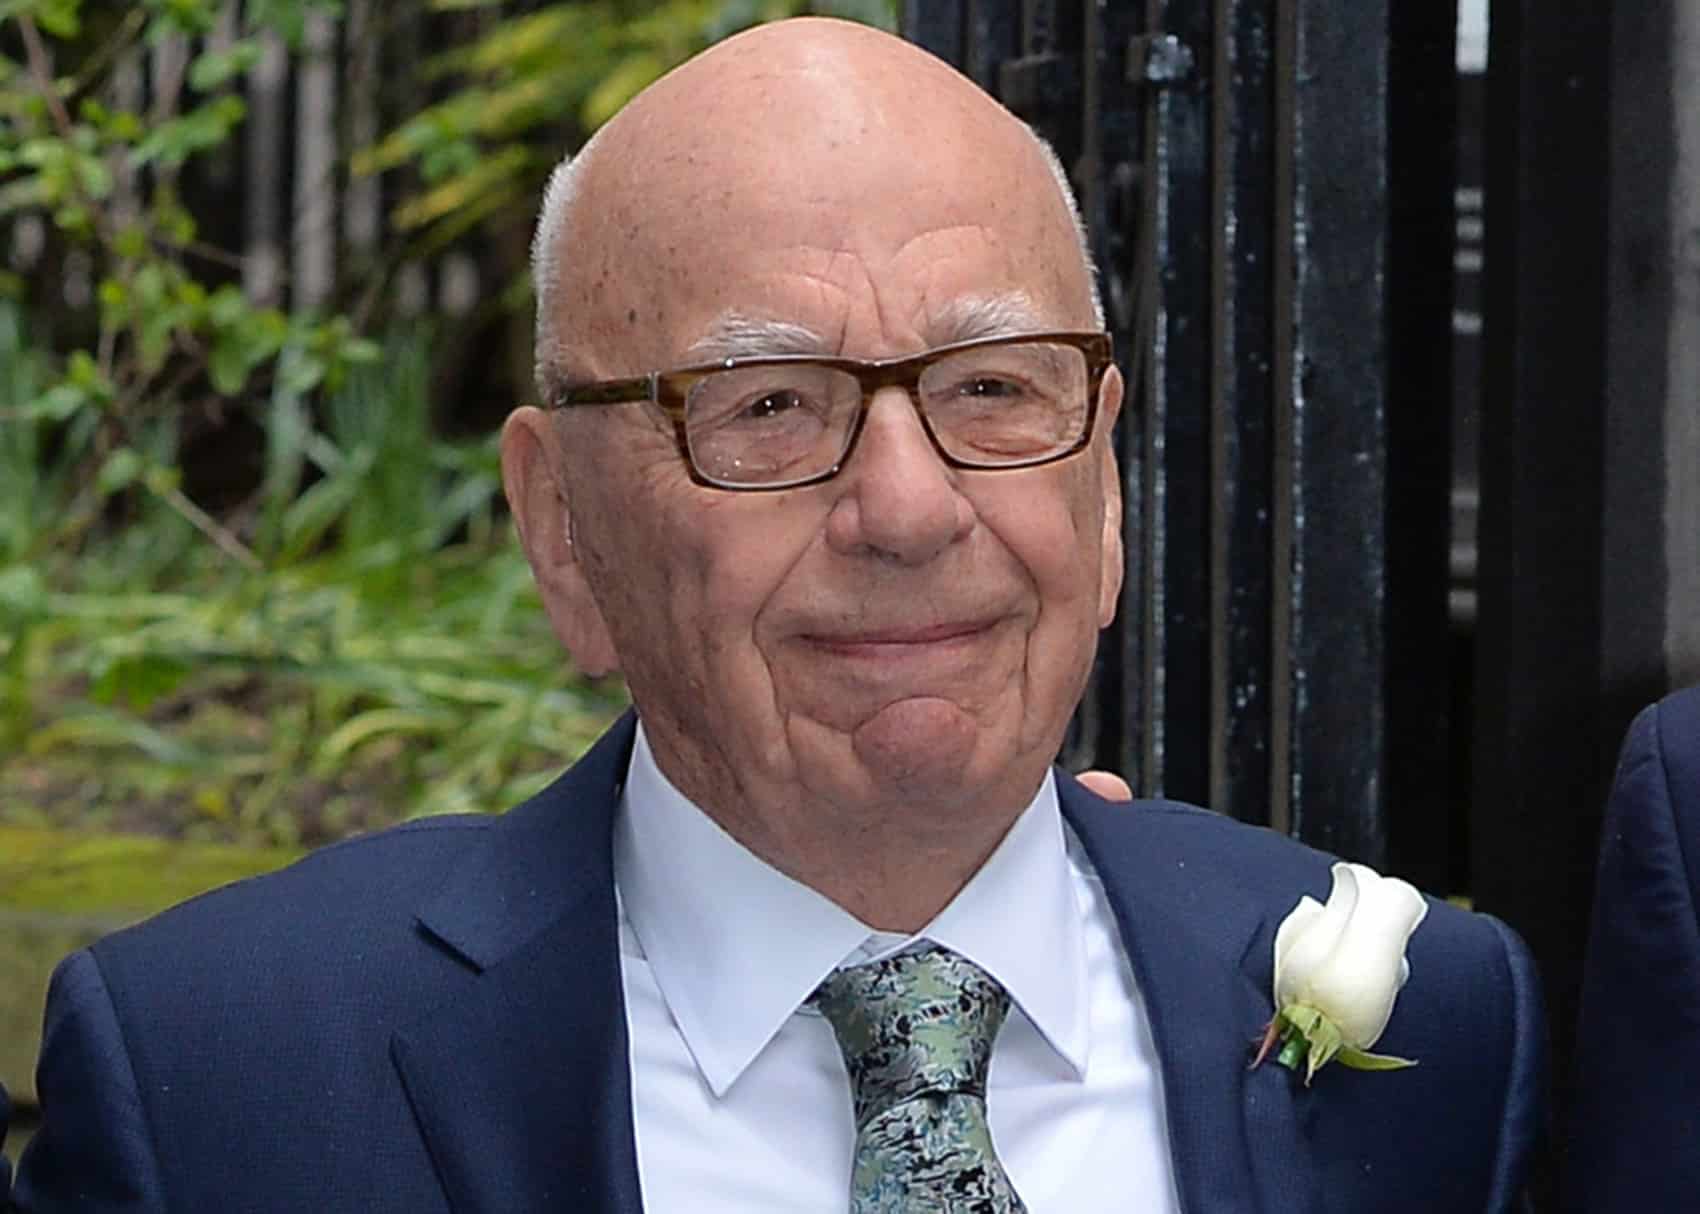 ‘I have much to do’: Rupert Murdoch’s bizarre divorce email leaked